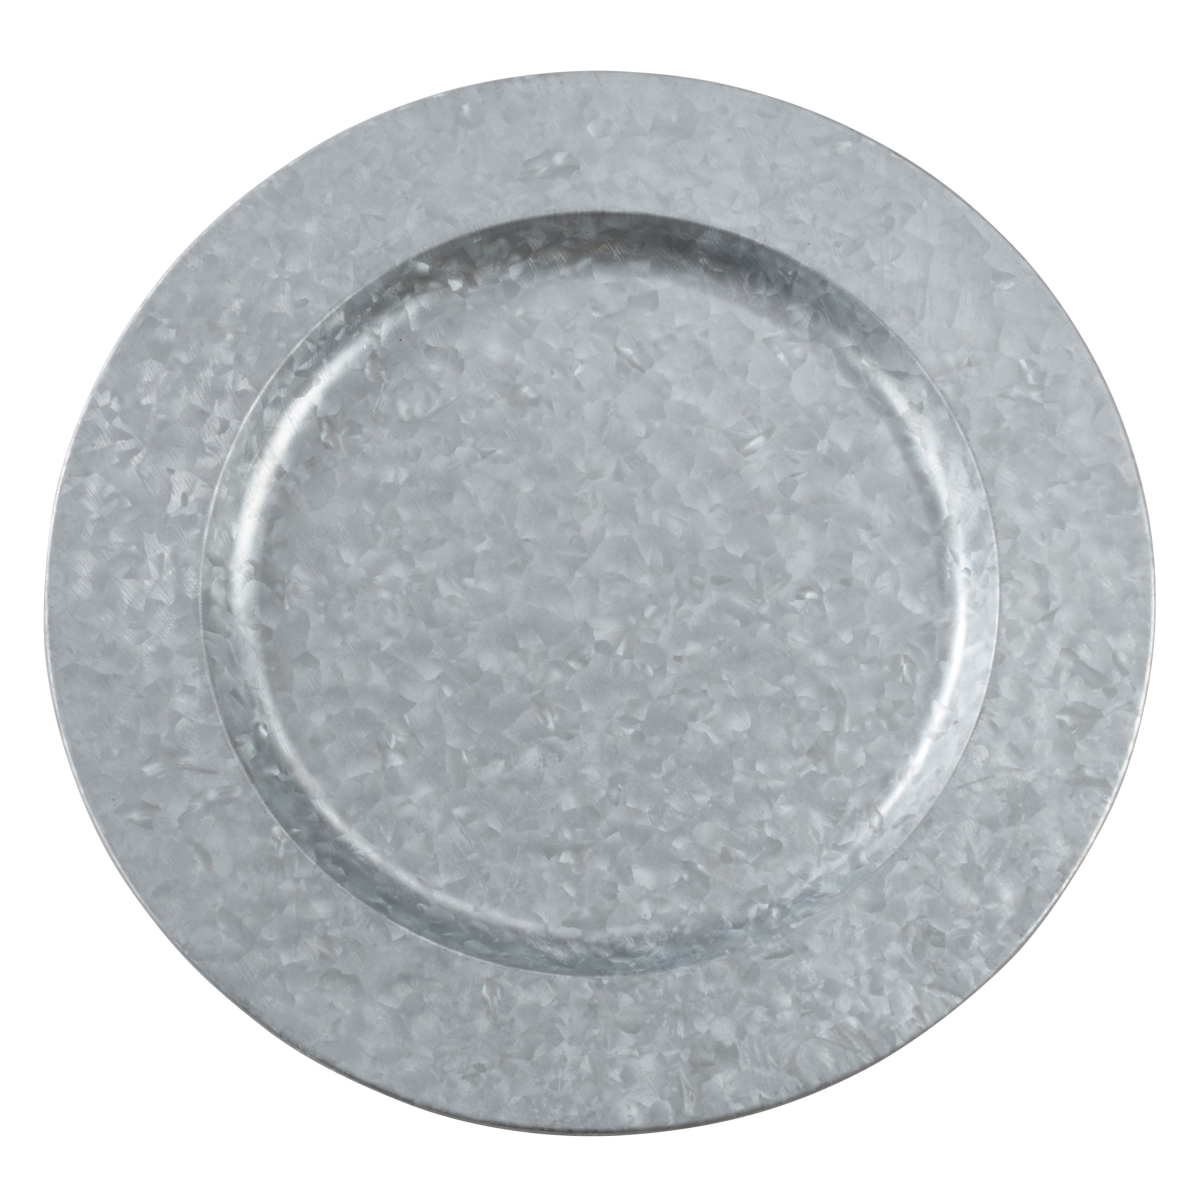 Ch374.s13r 13 In. Round Metal Charger Plates With Polished Galvanized Finish - Silver, Set Of 4